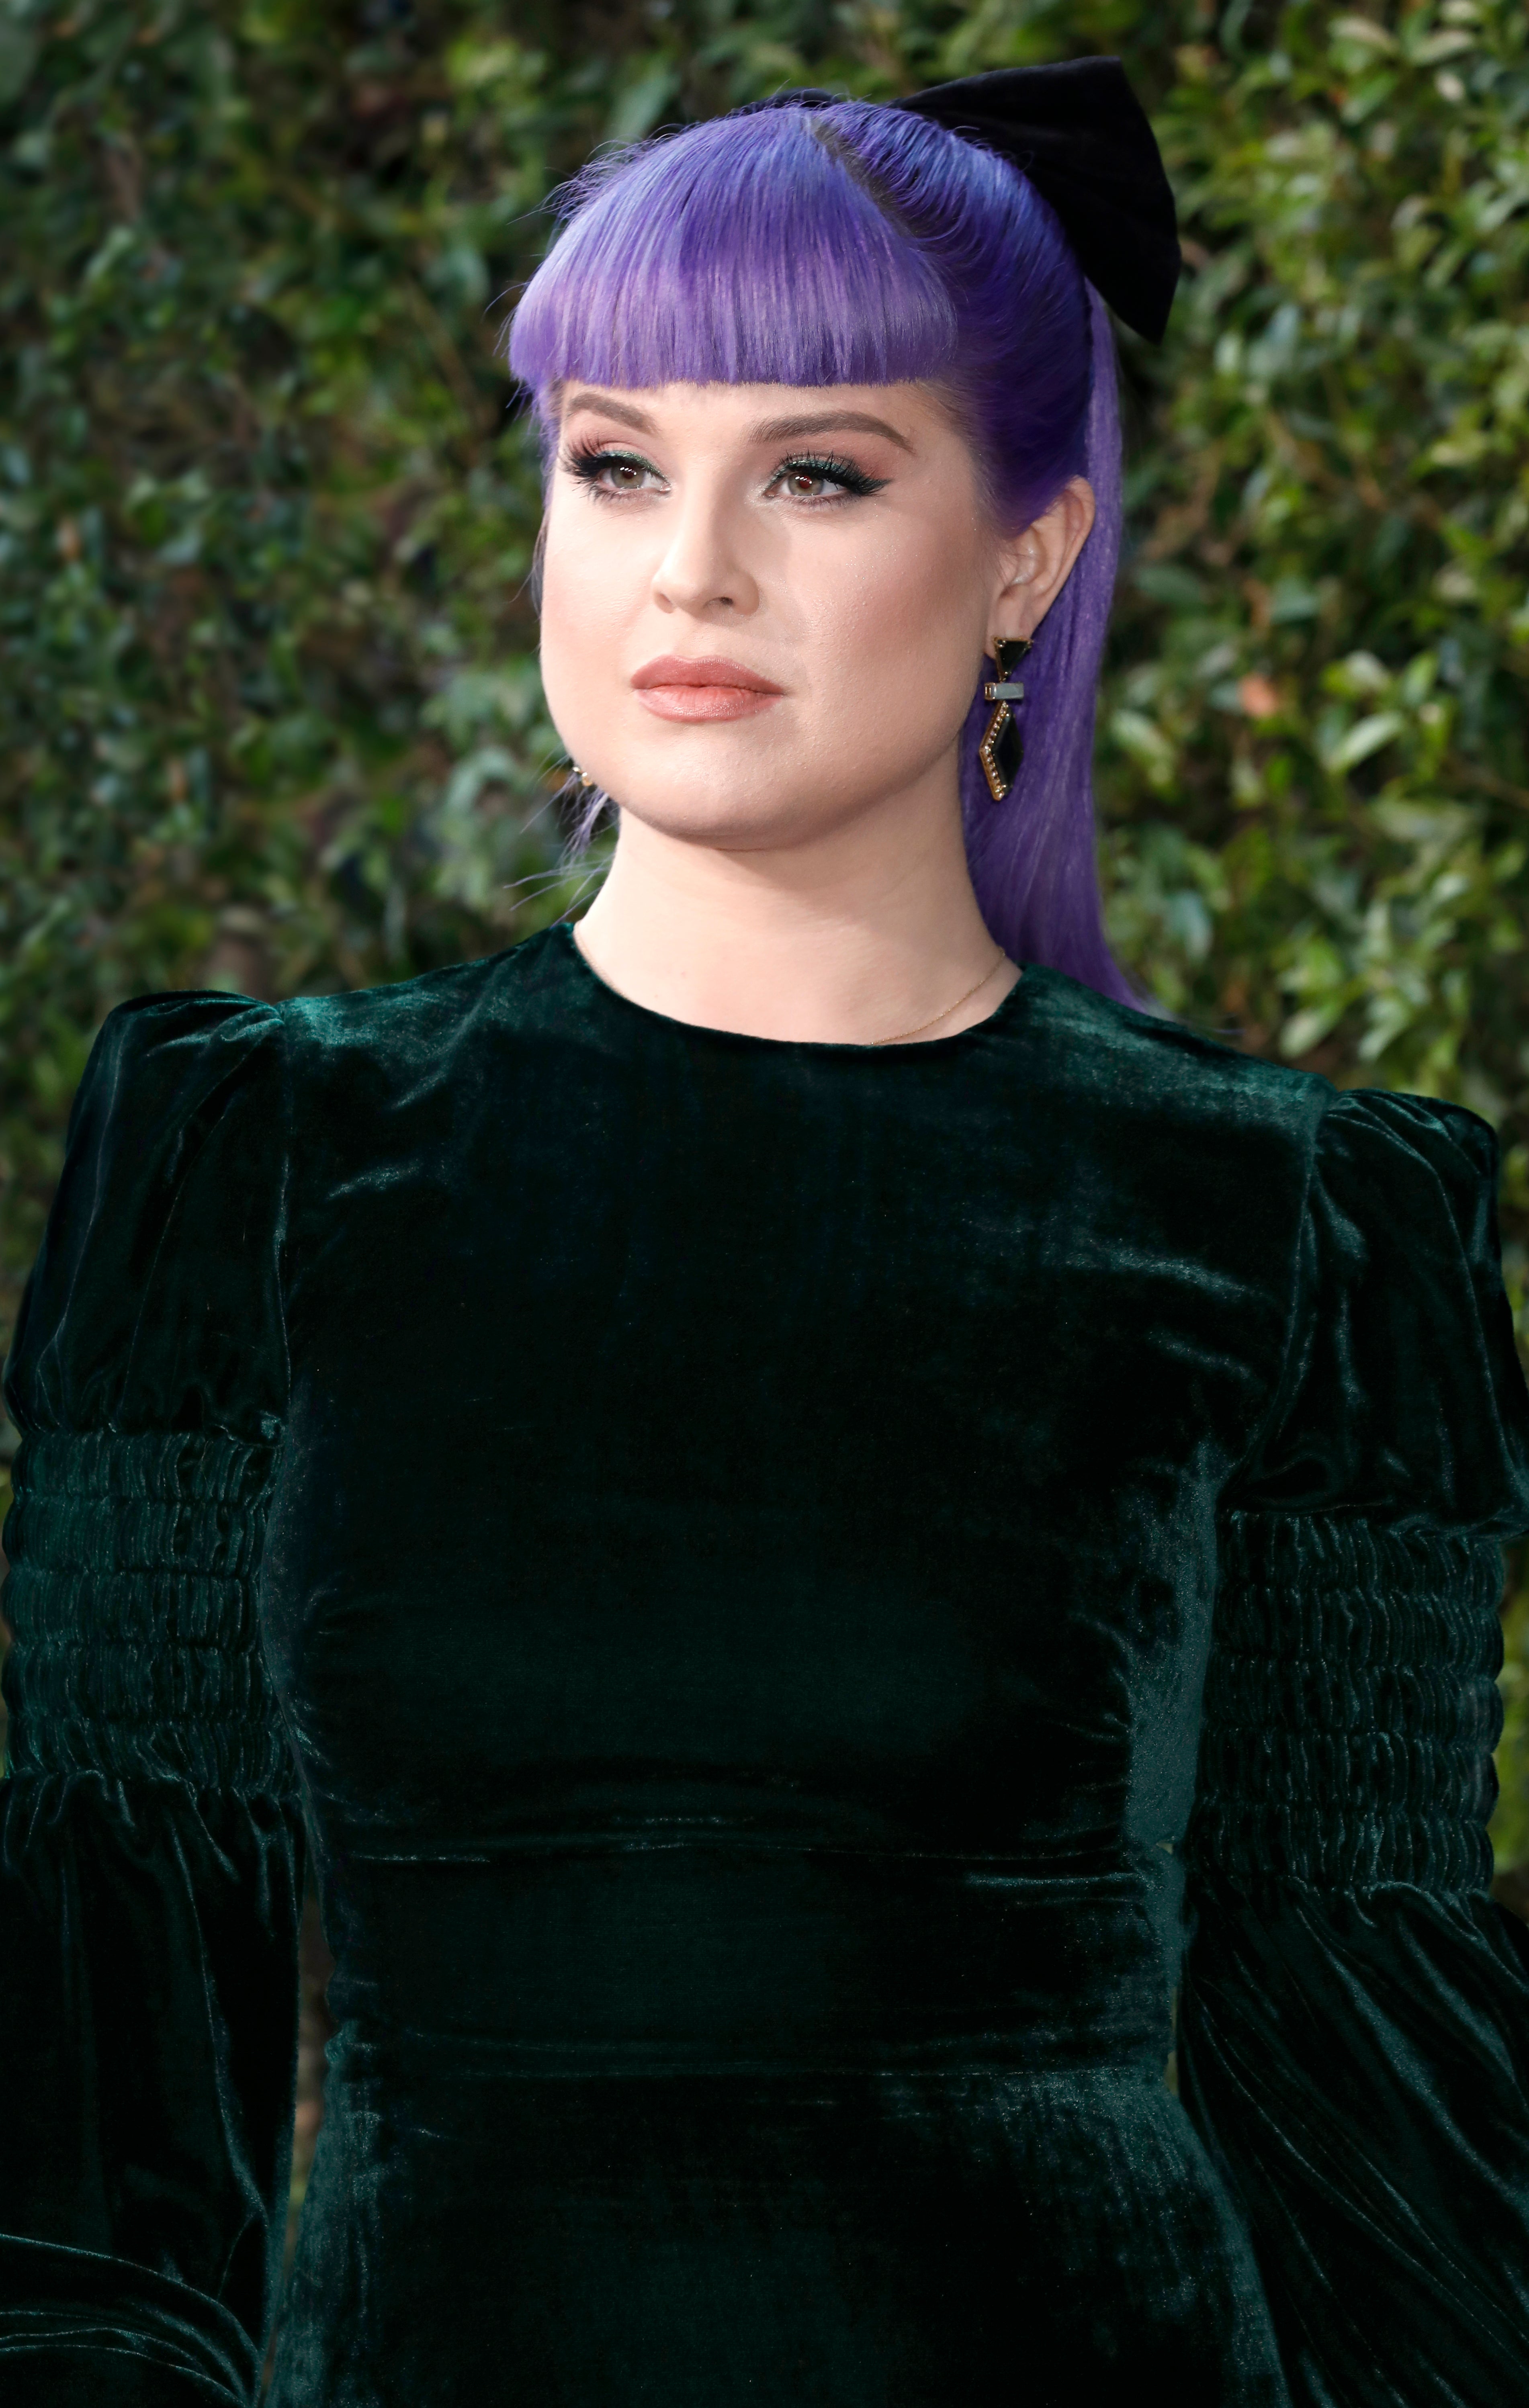 Close-up of Kelly at a media event in a long-sleeved velvet outfit